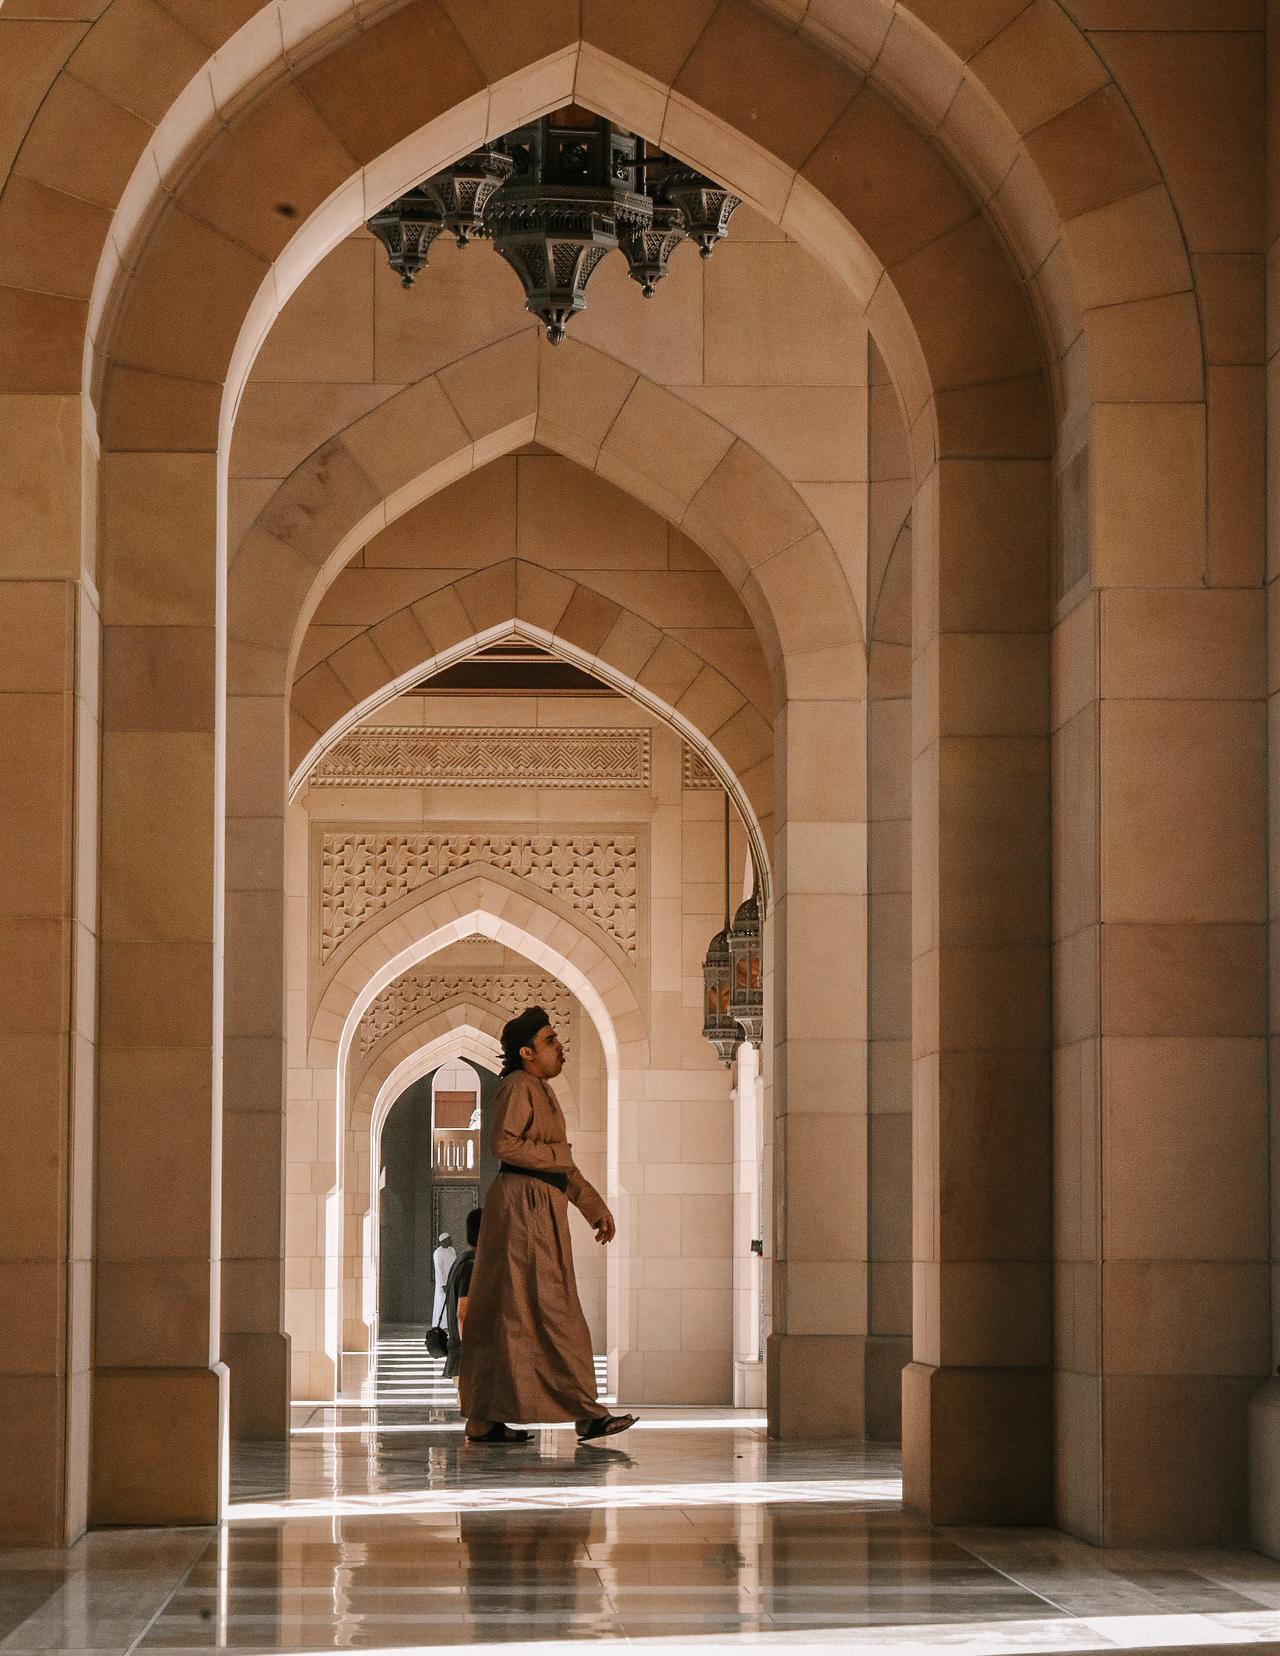 arches and a man in the grand mosque of Muscat, Oman